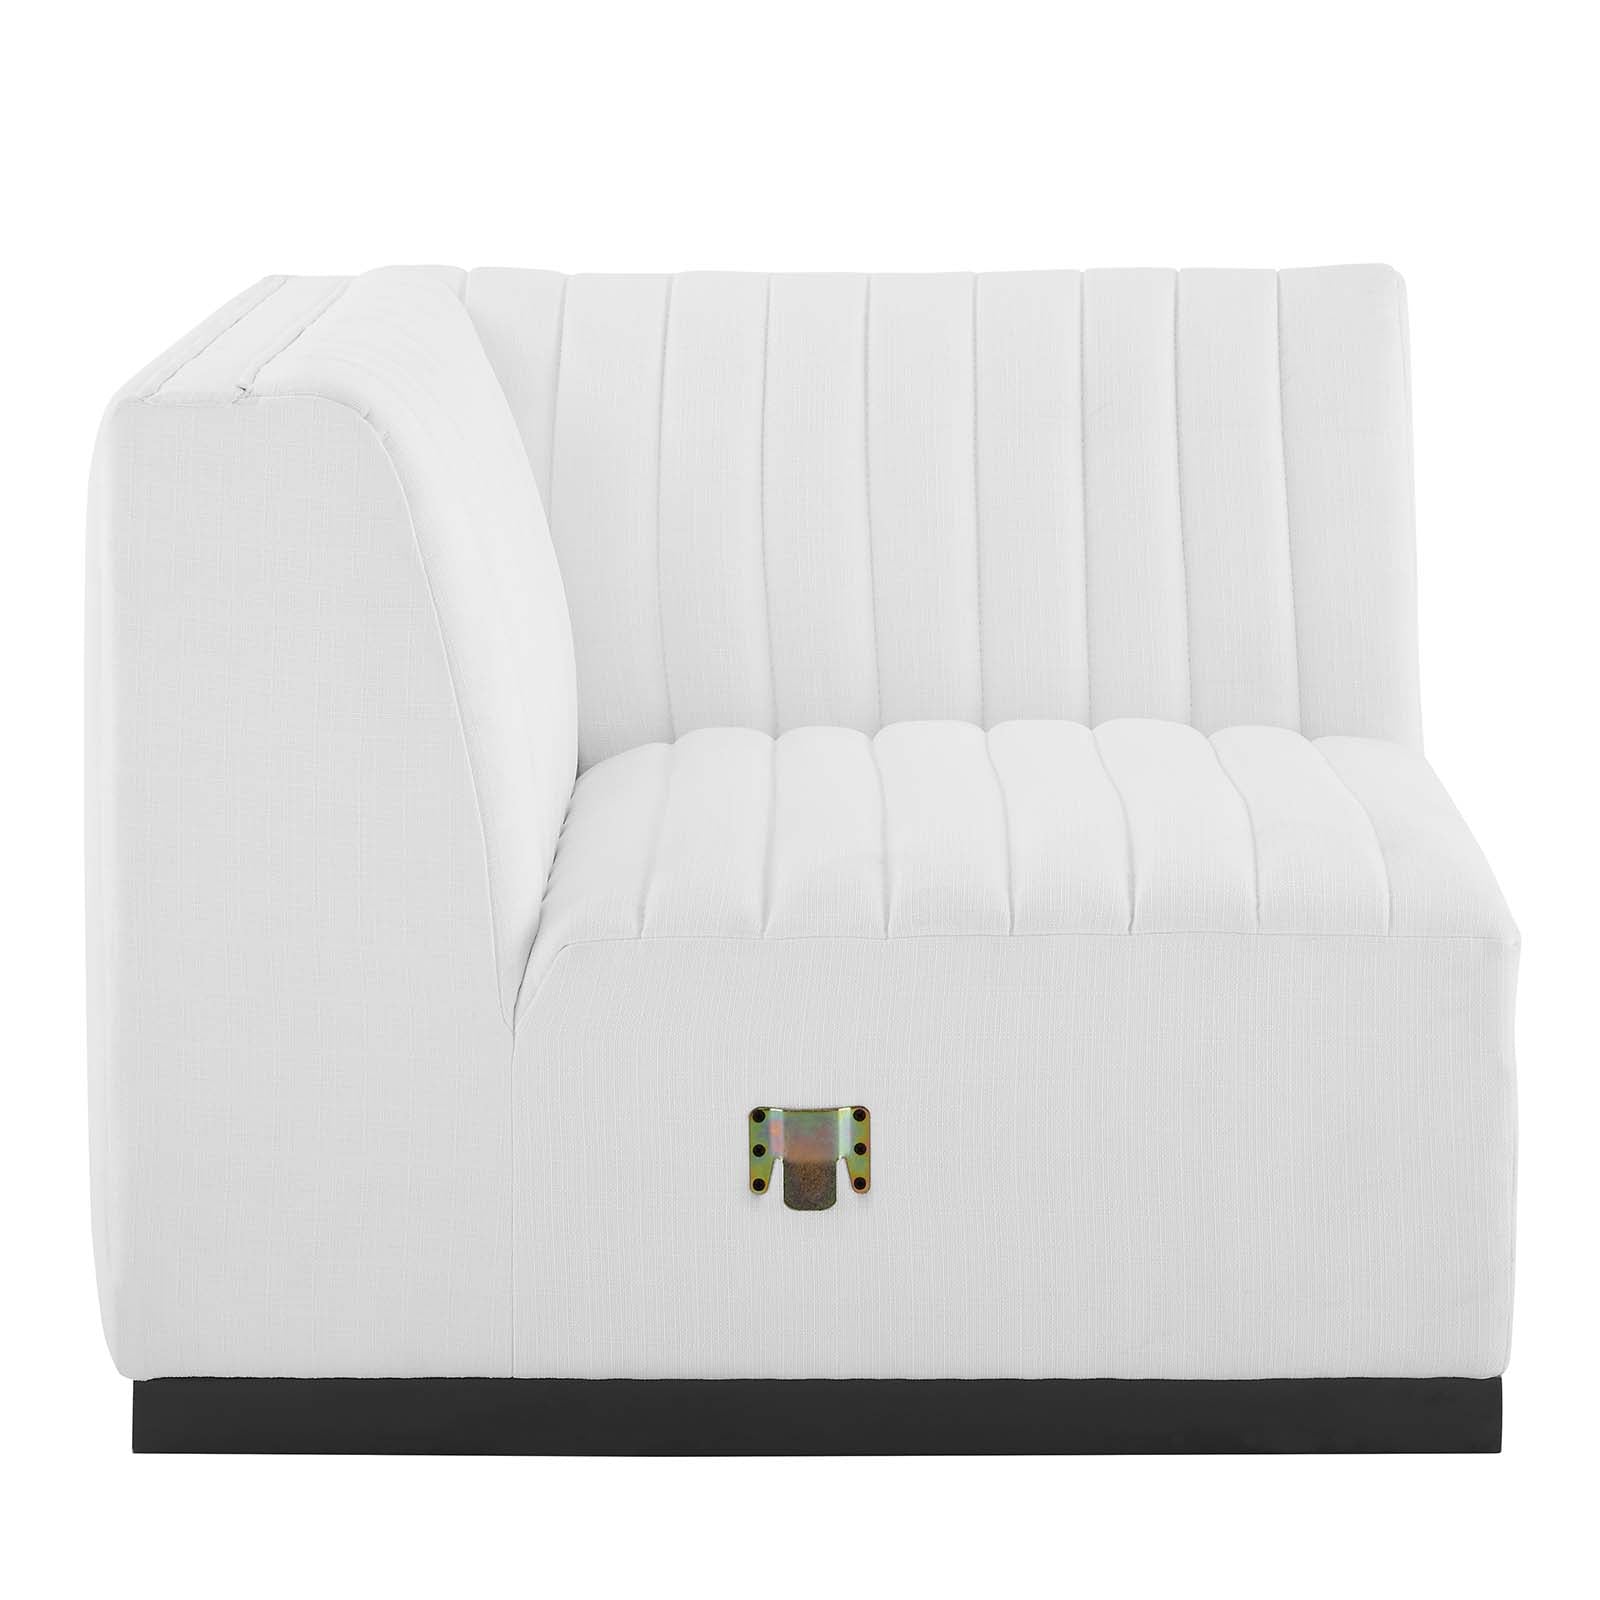 Modway Accent Chairs - Conjure Channel Tufted Upholstered Fabric Left Corner Chair Black White